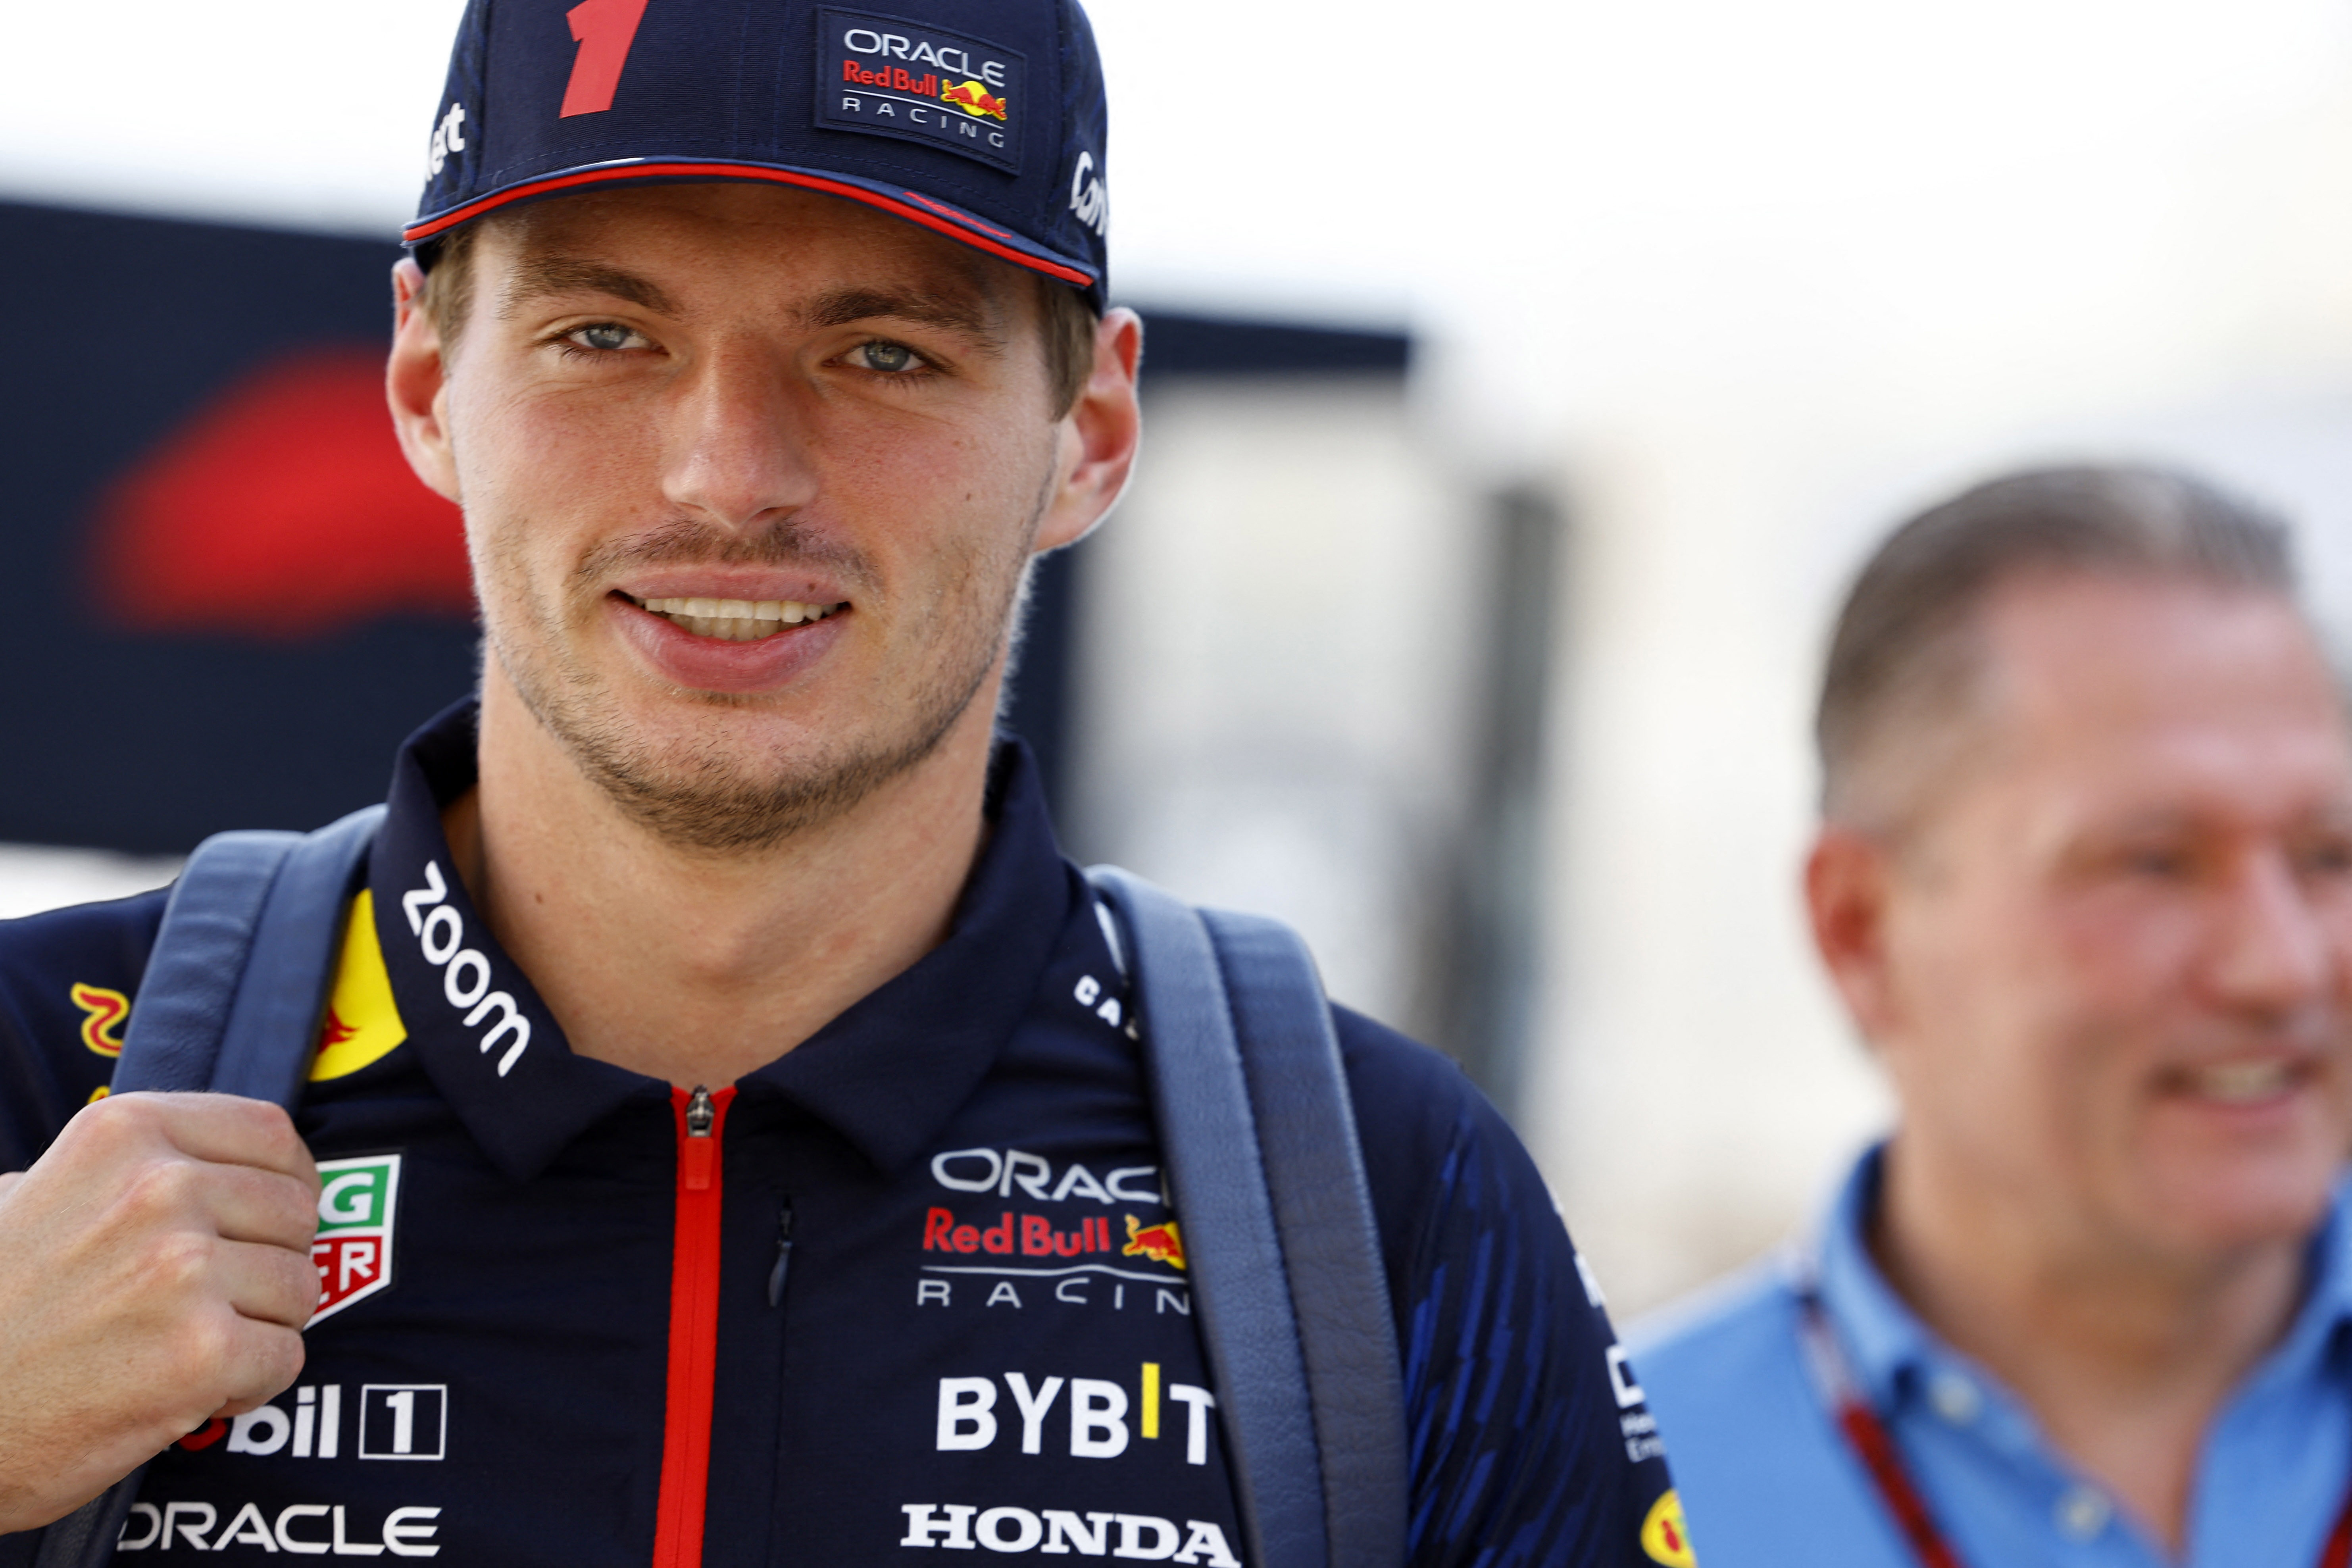 Max Verstappen becomes the first-ever active driver to be a